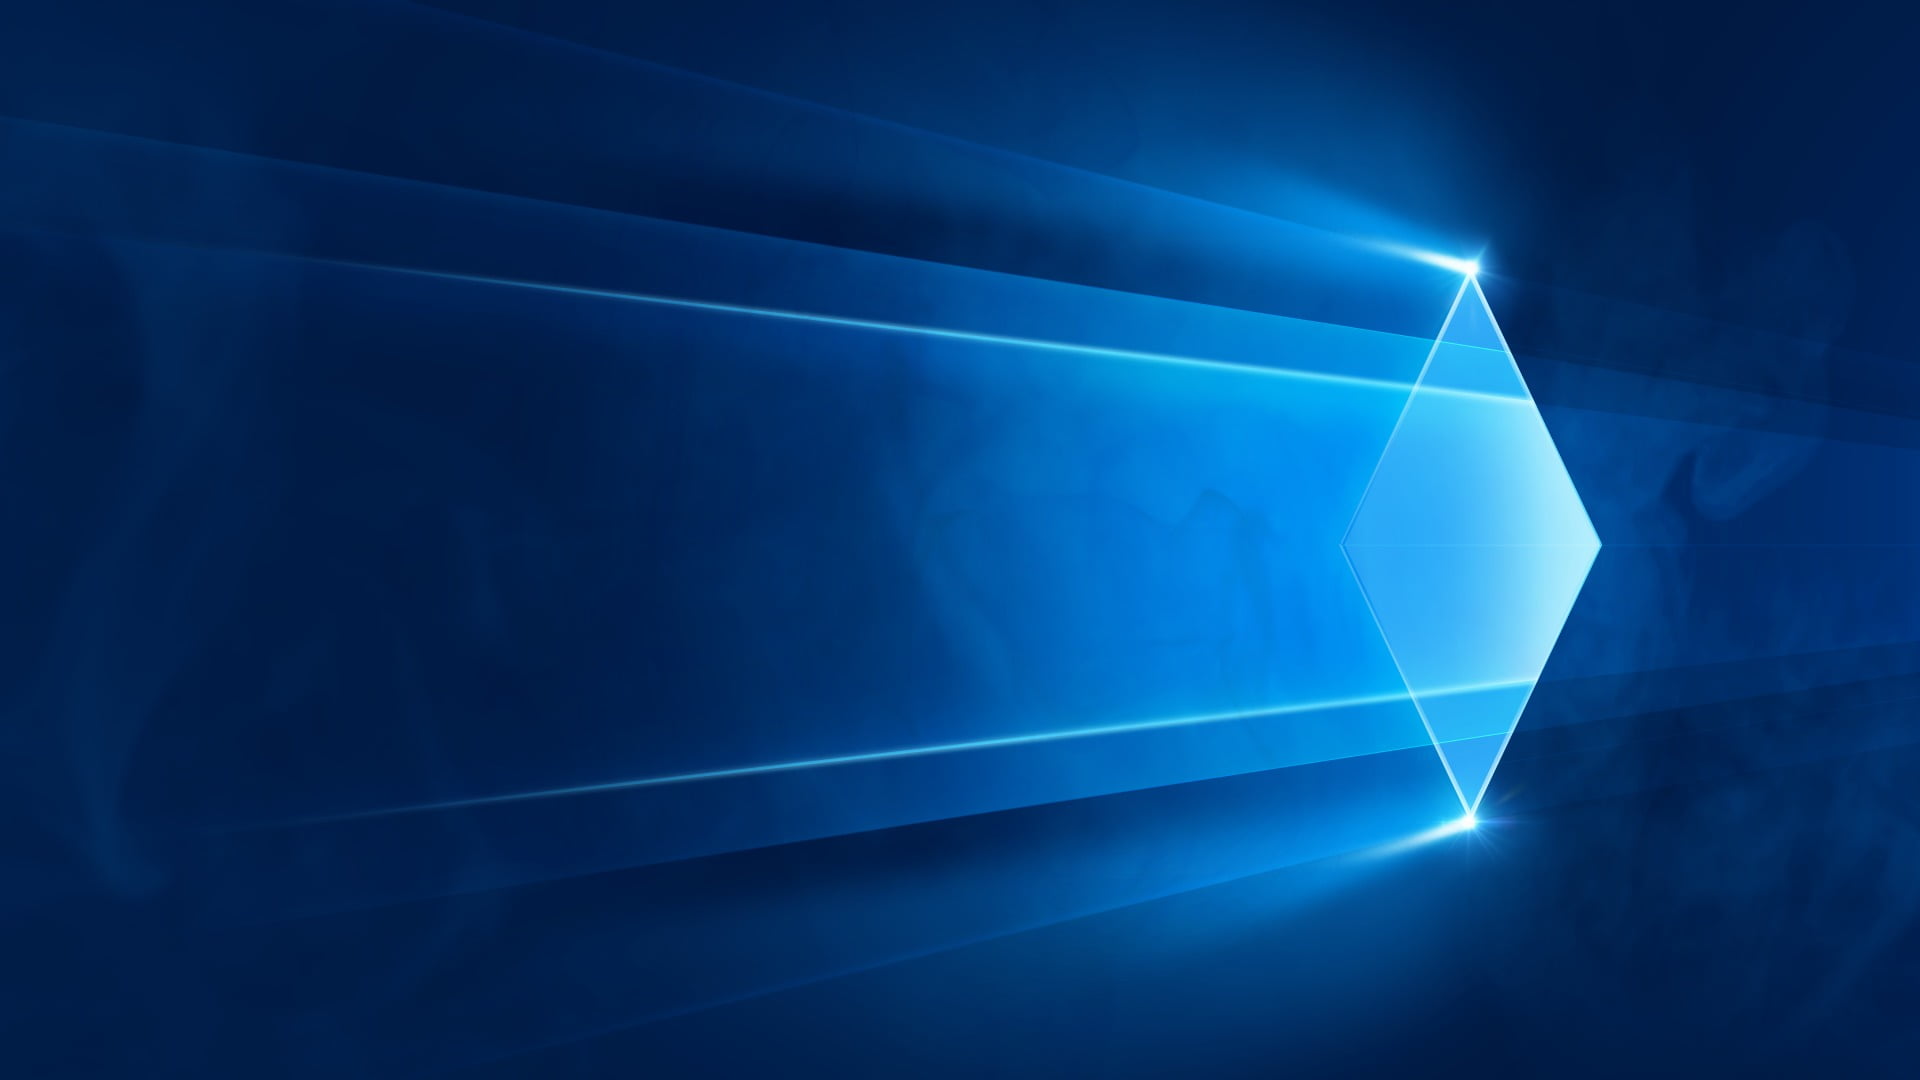 square blue lights wallpaper, The Sims, Windows 10, technology